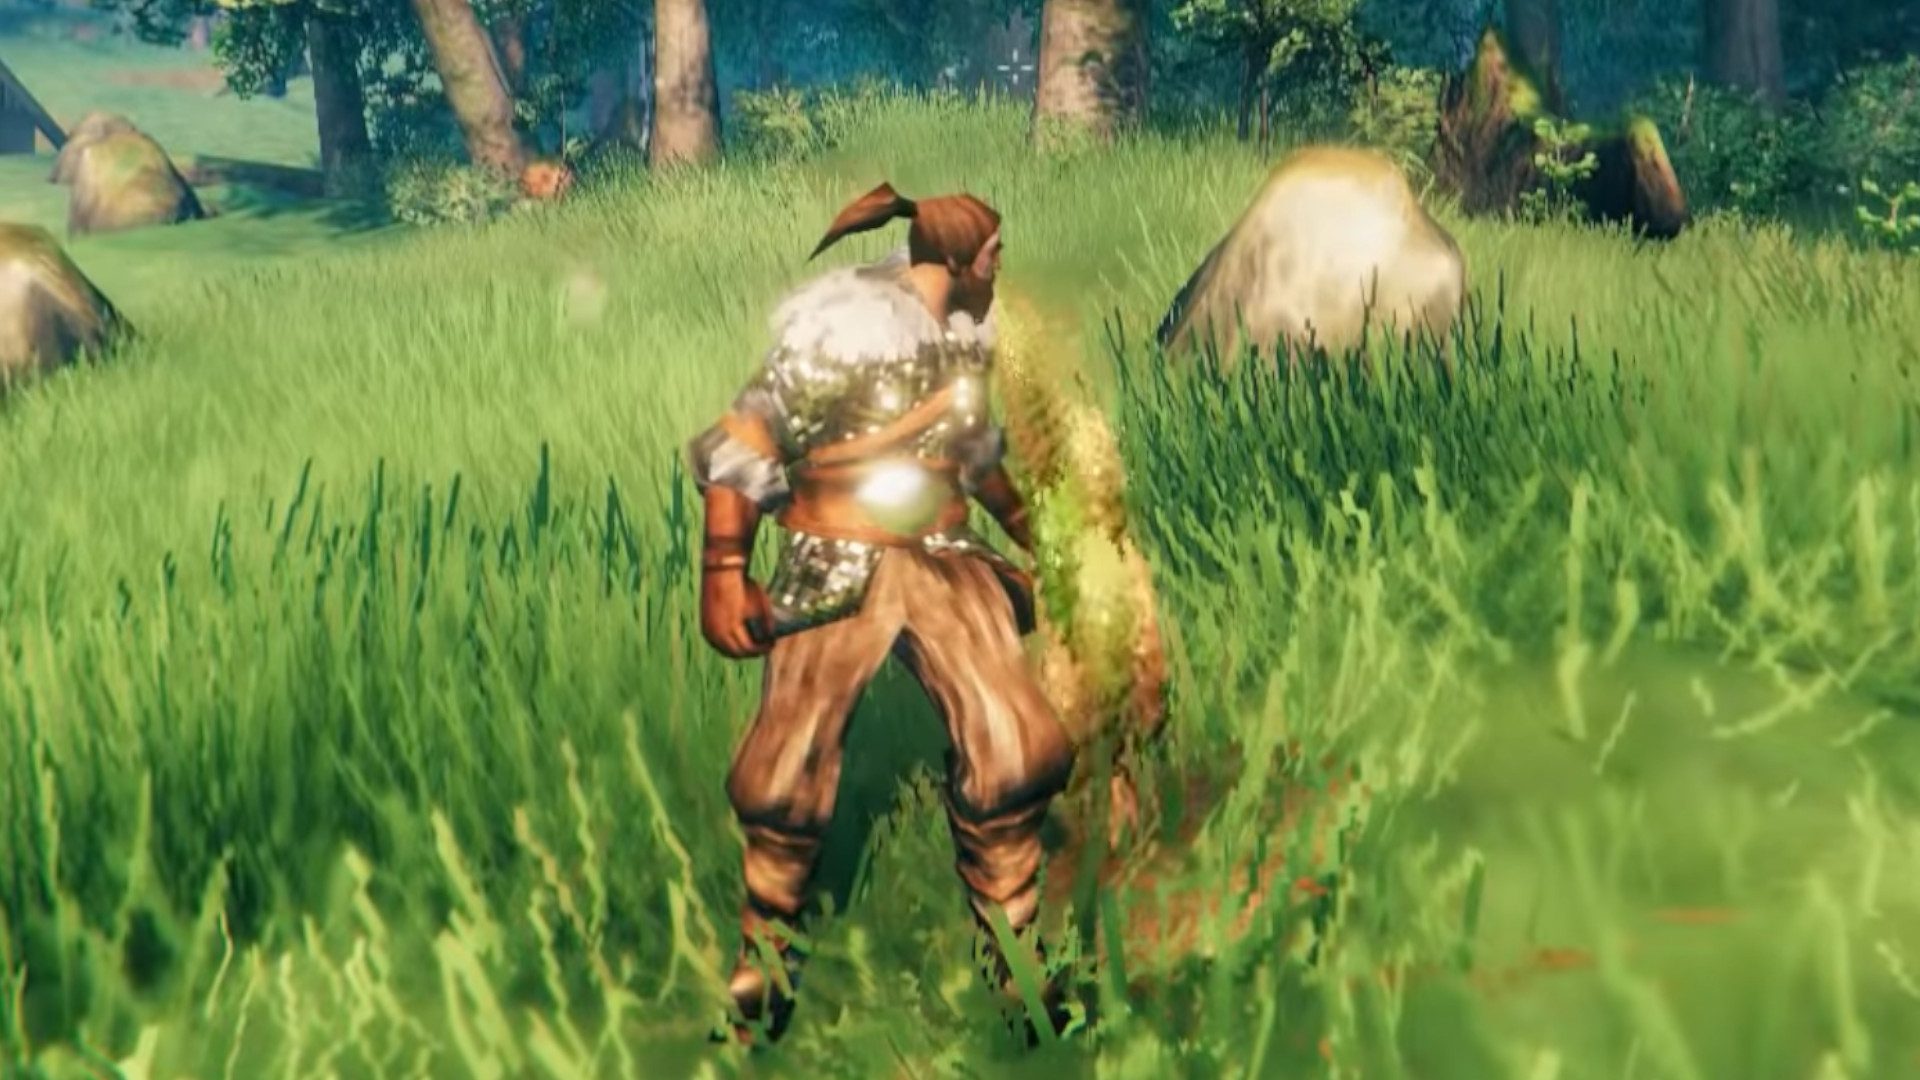 You’ll soon be able to vomit on command in Valheim